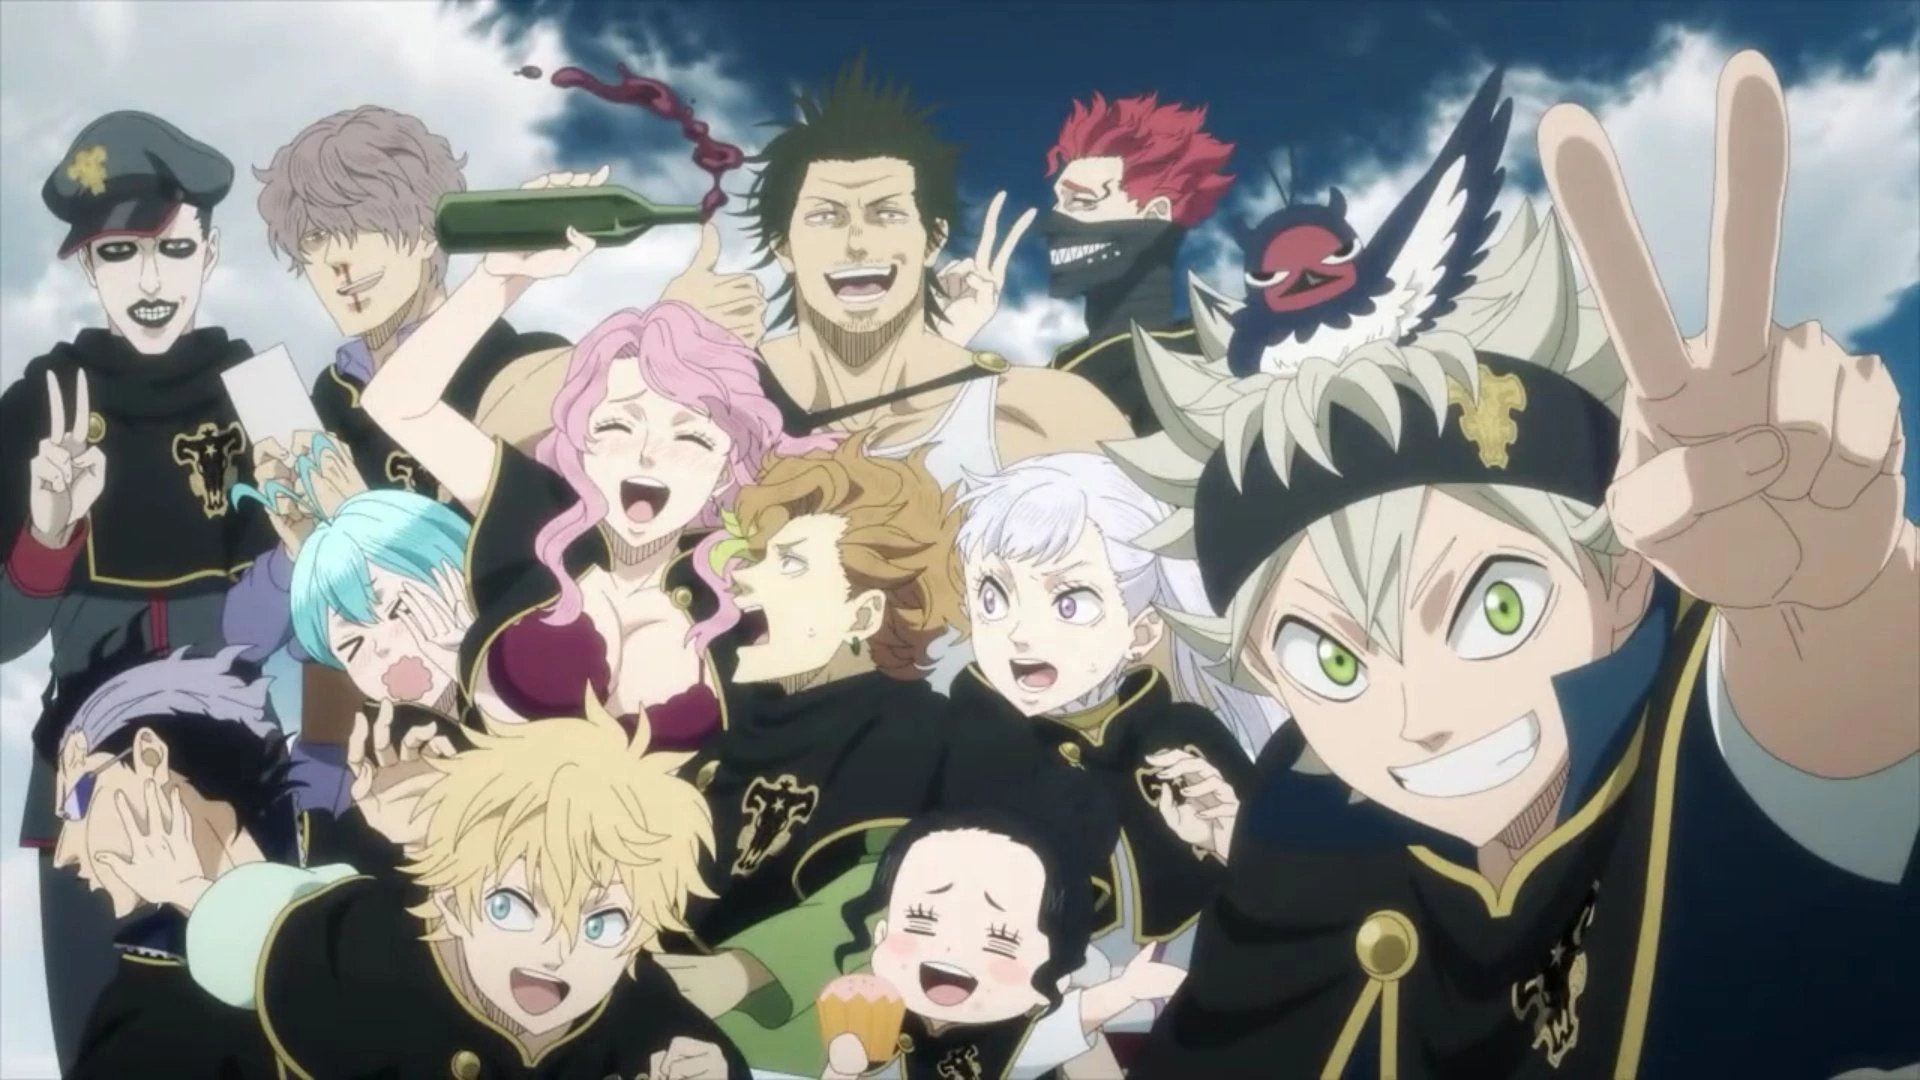 Black Clover Review: The Most Underrated Shonen